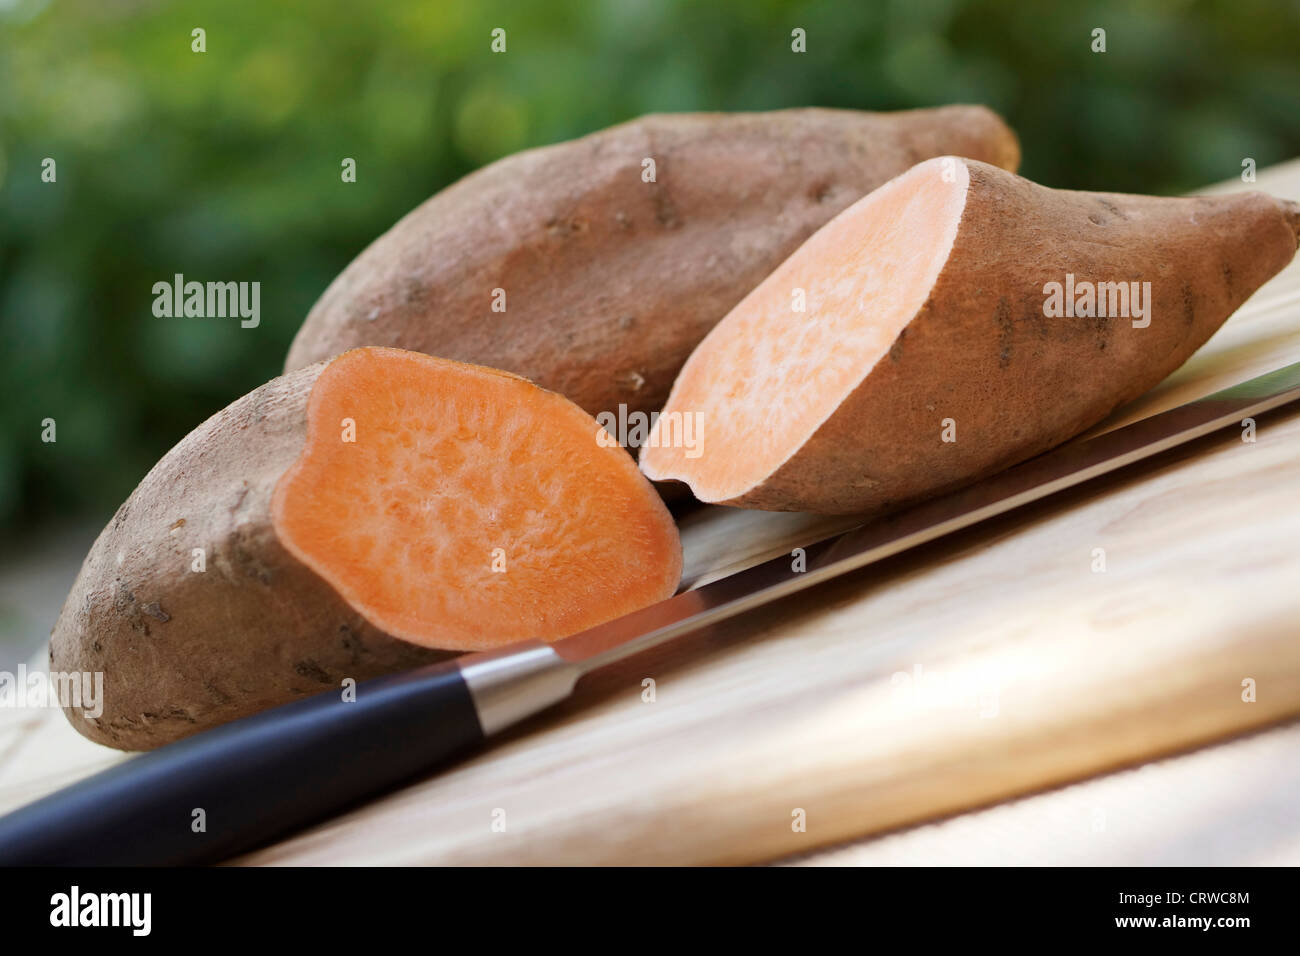 18,283 Yellow Yam Images, Stock Photos, 3D objects, & Vectors